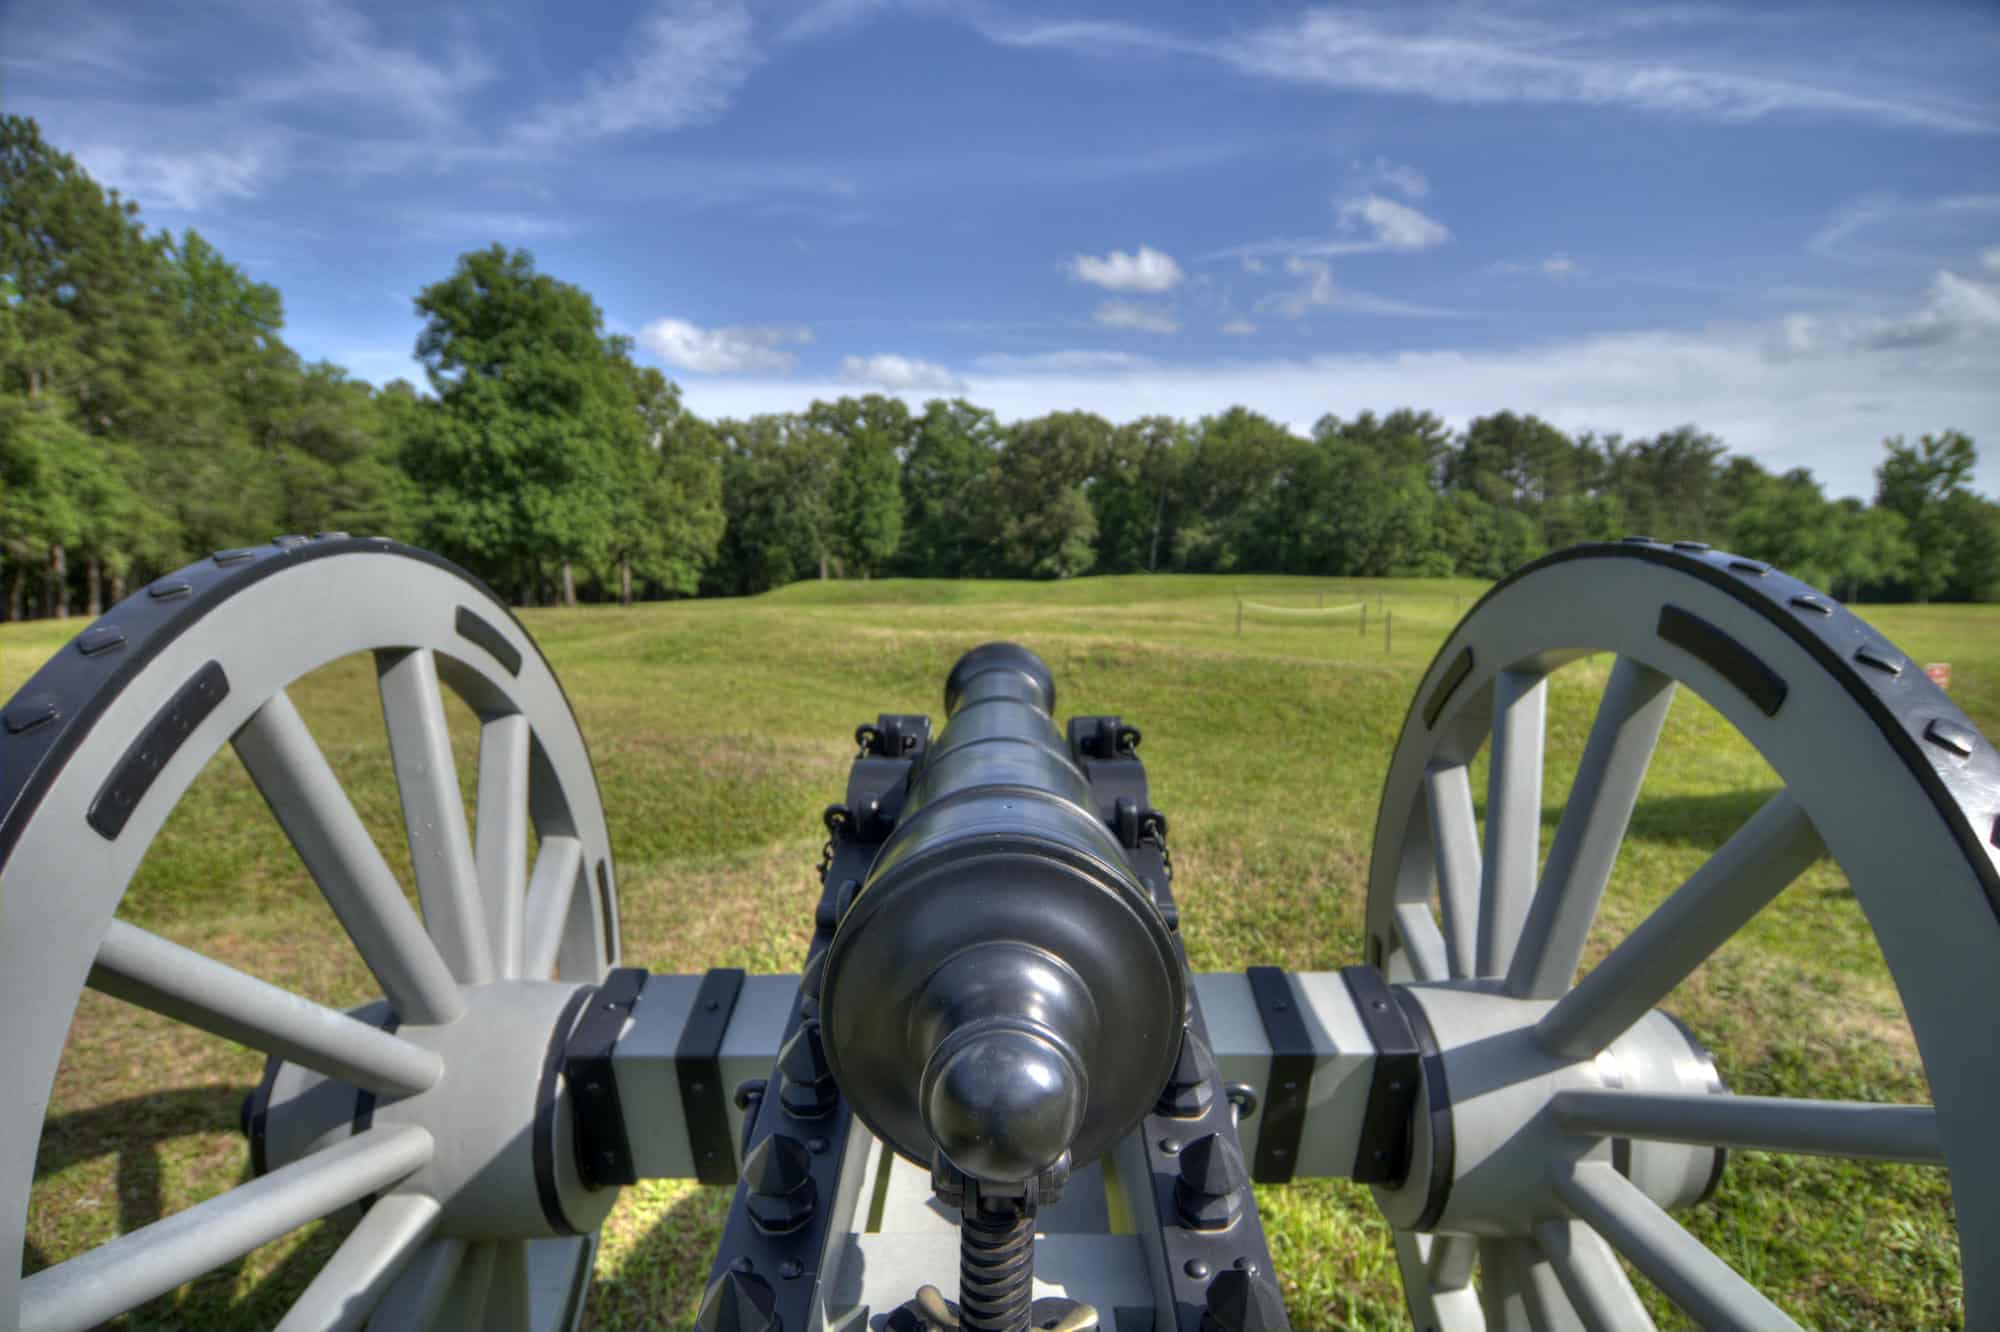 A canon pointing toward the earthen Star Fort at Ninety Six National Historic Site in South Carolina.